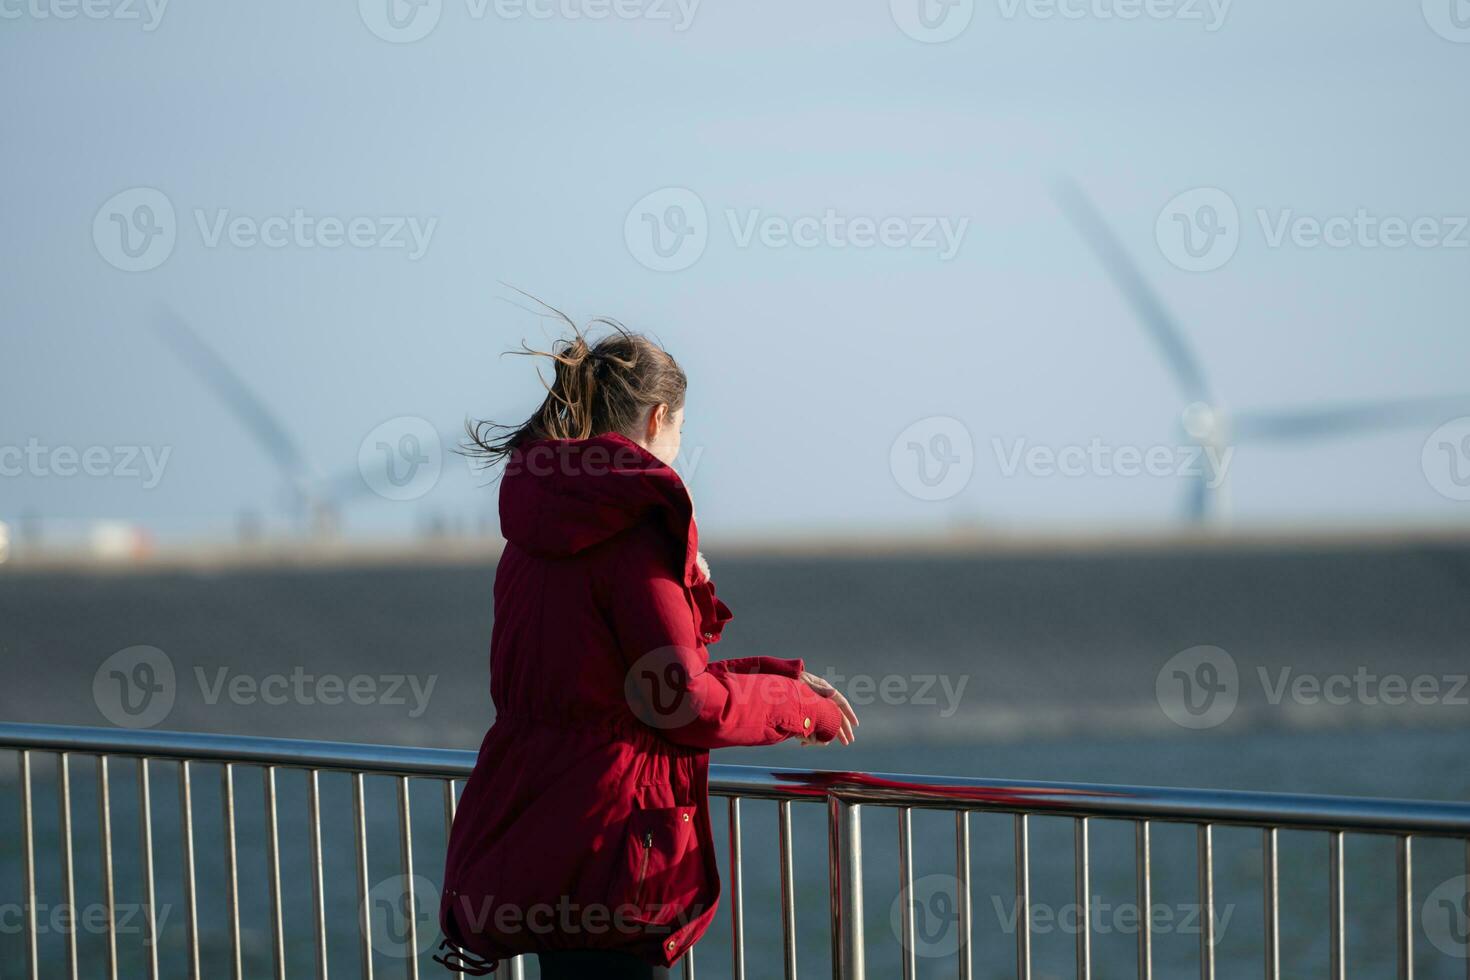 On the background of windmills, A young woman in a red jacket is enjoying her winter vacation. photo